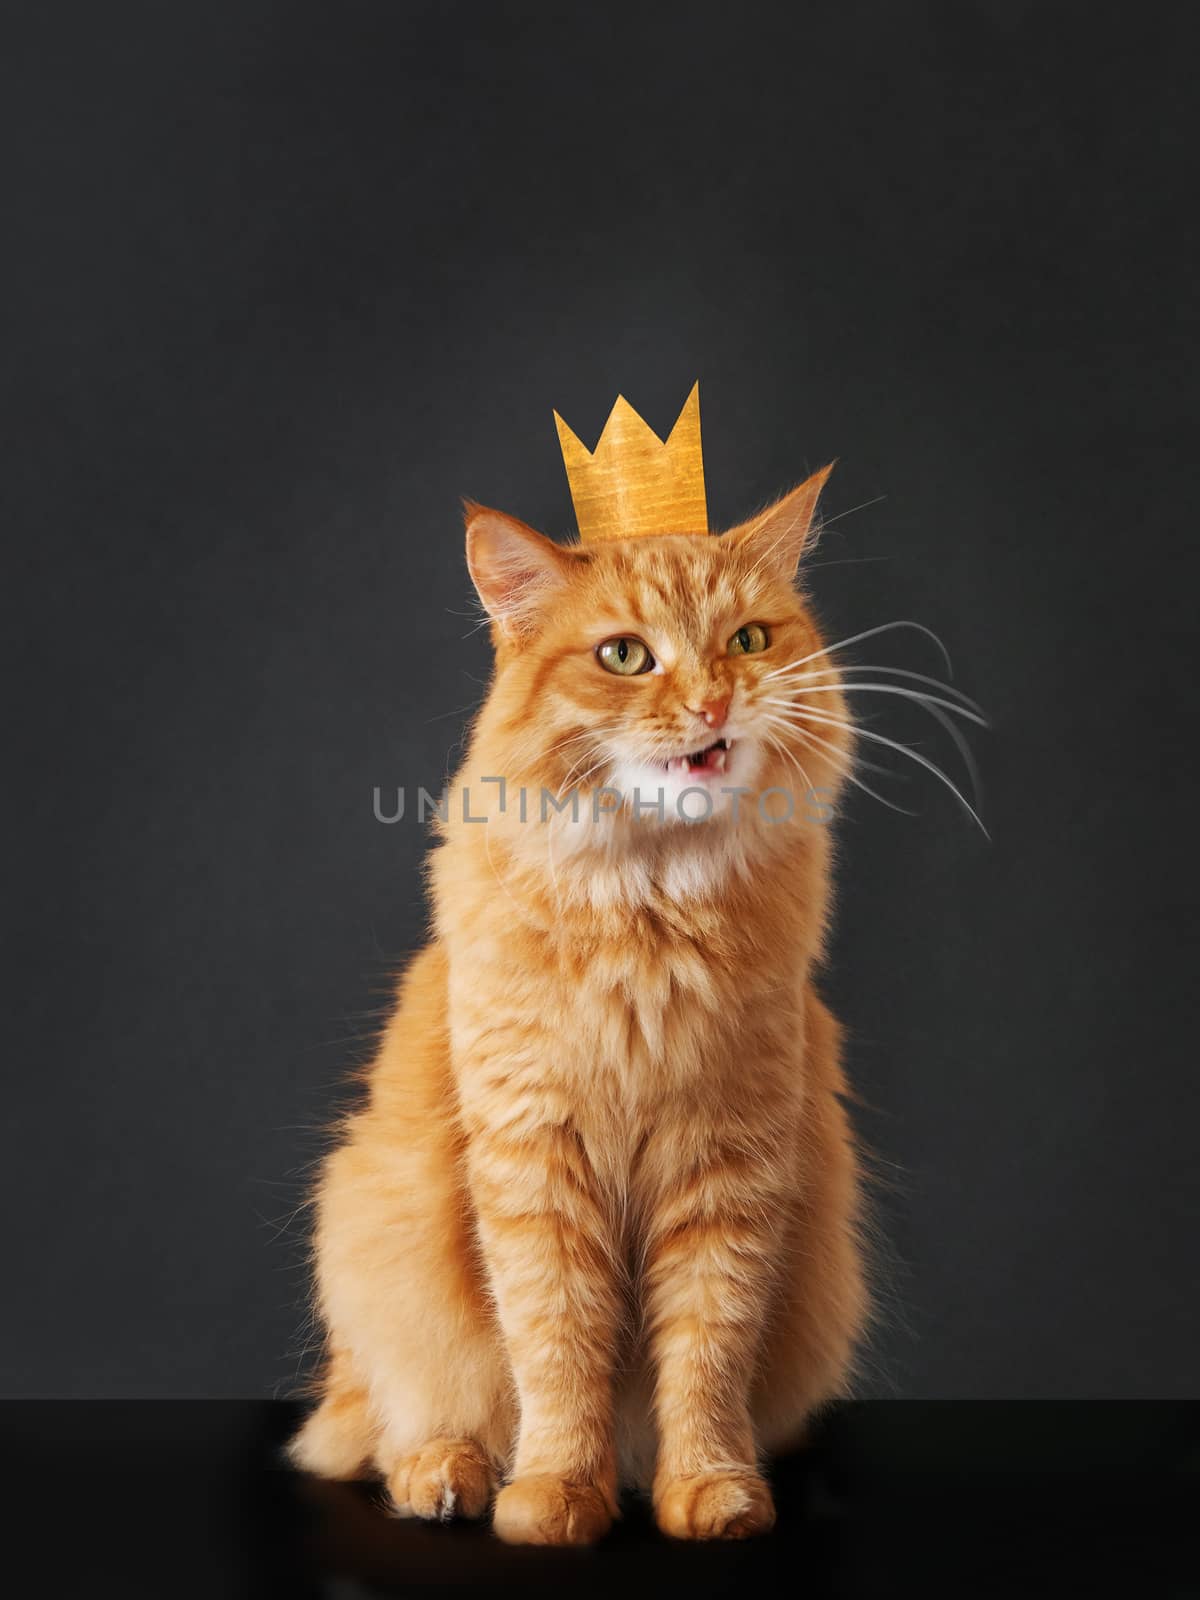 Cute ginger cat with awesome expression on face and golden crown on head posing like lion on black background. Symbol of your inner self.